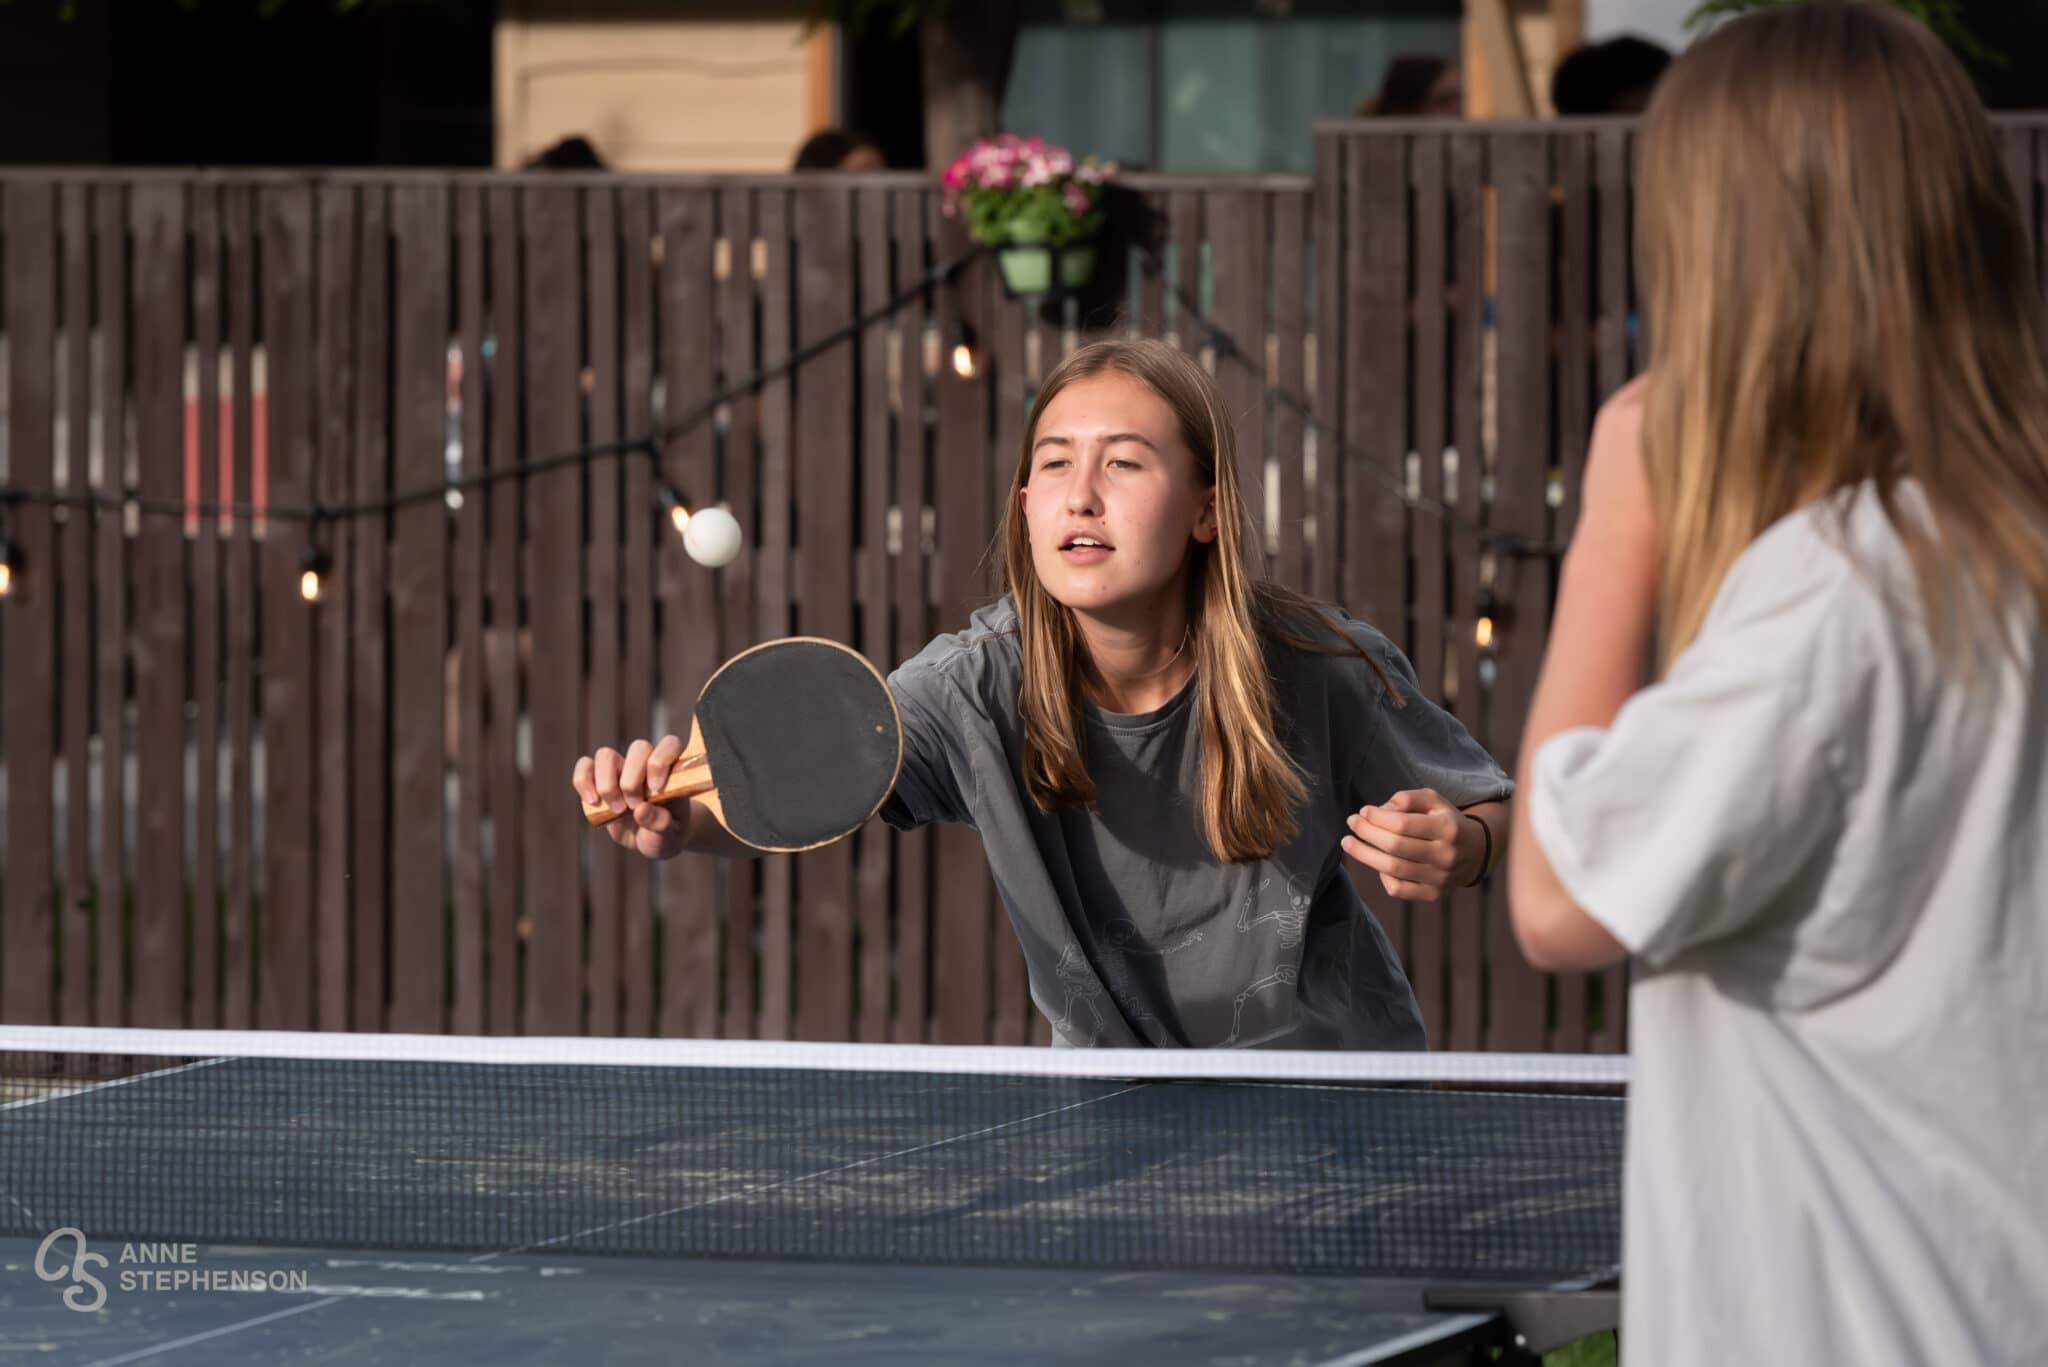 A young teen returns a ping pong ball during a lively outdoor game.